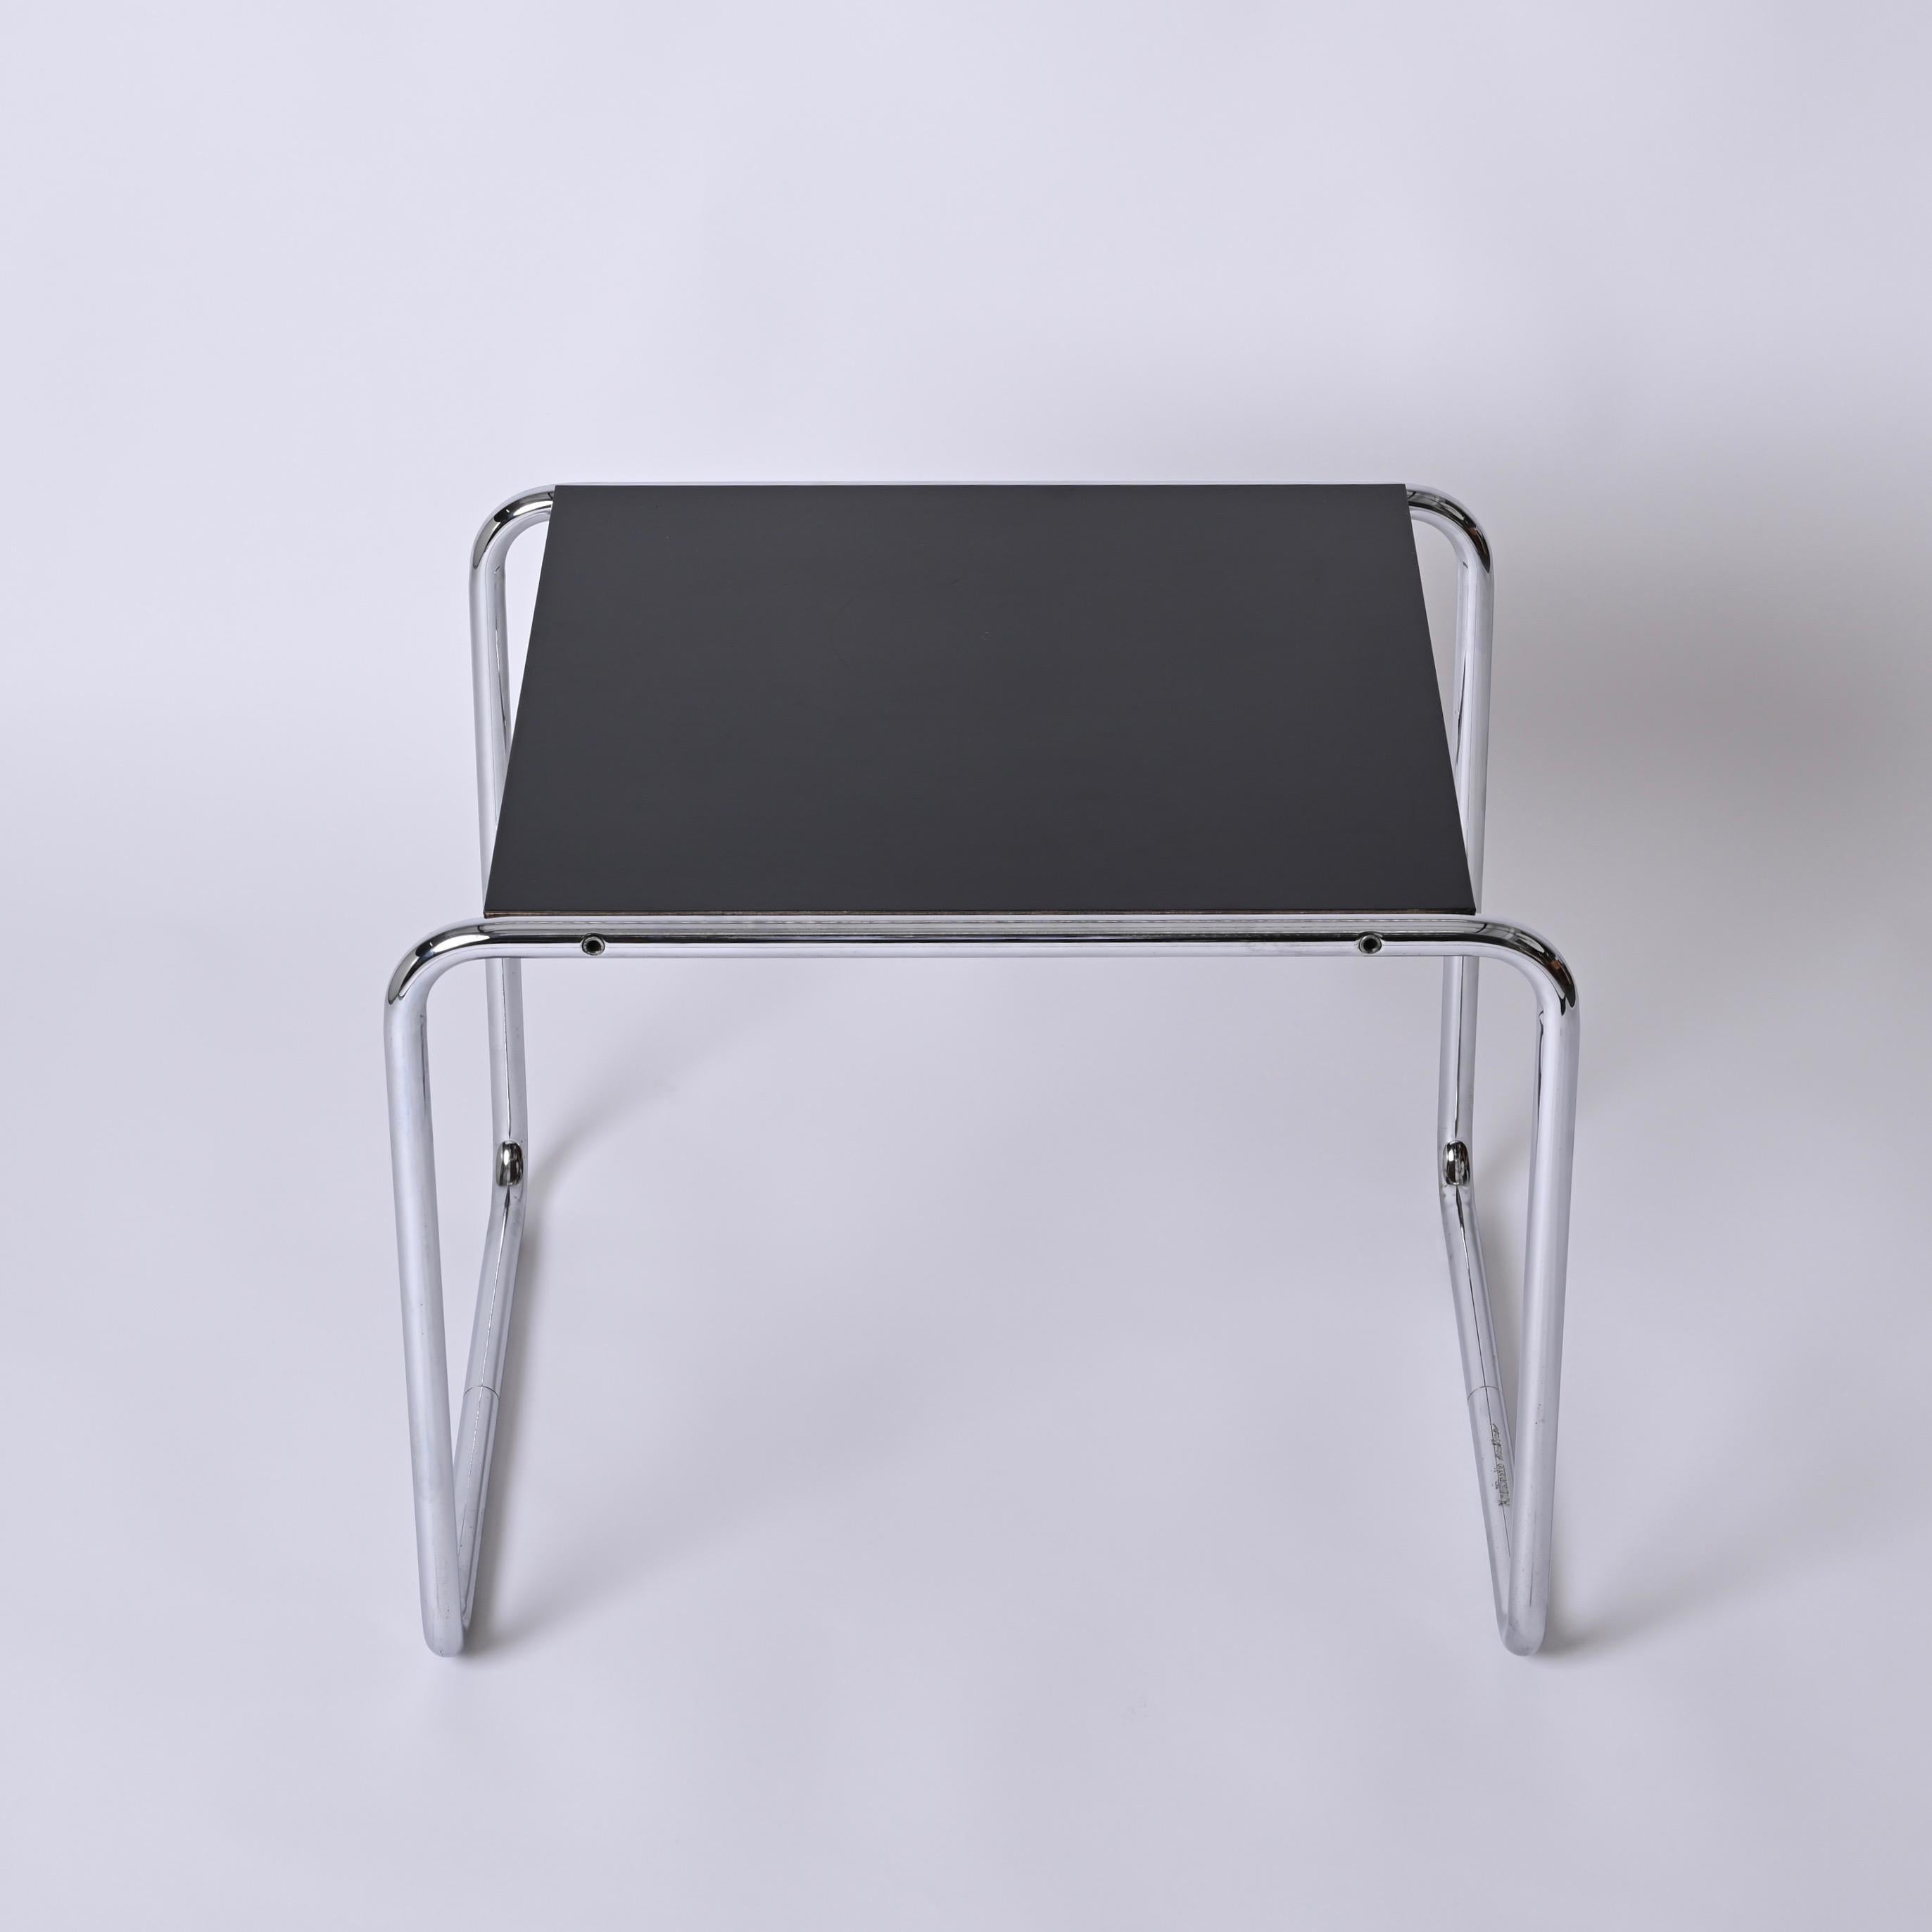 American Signed Marcel Breuer for Knoll, Bauhaus Black 'Laccio'  Side Table, USA 1940s For Sale